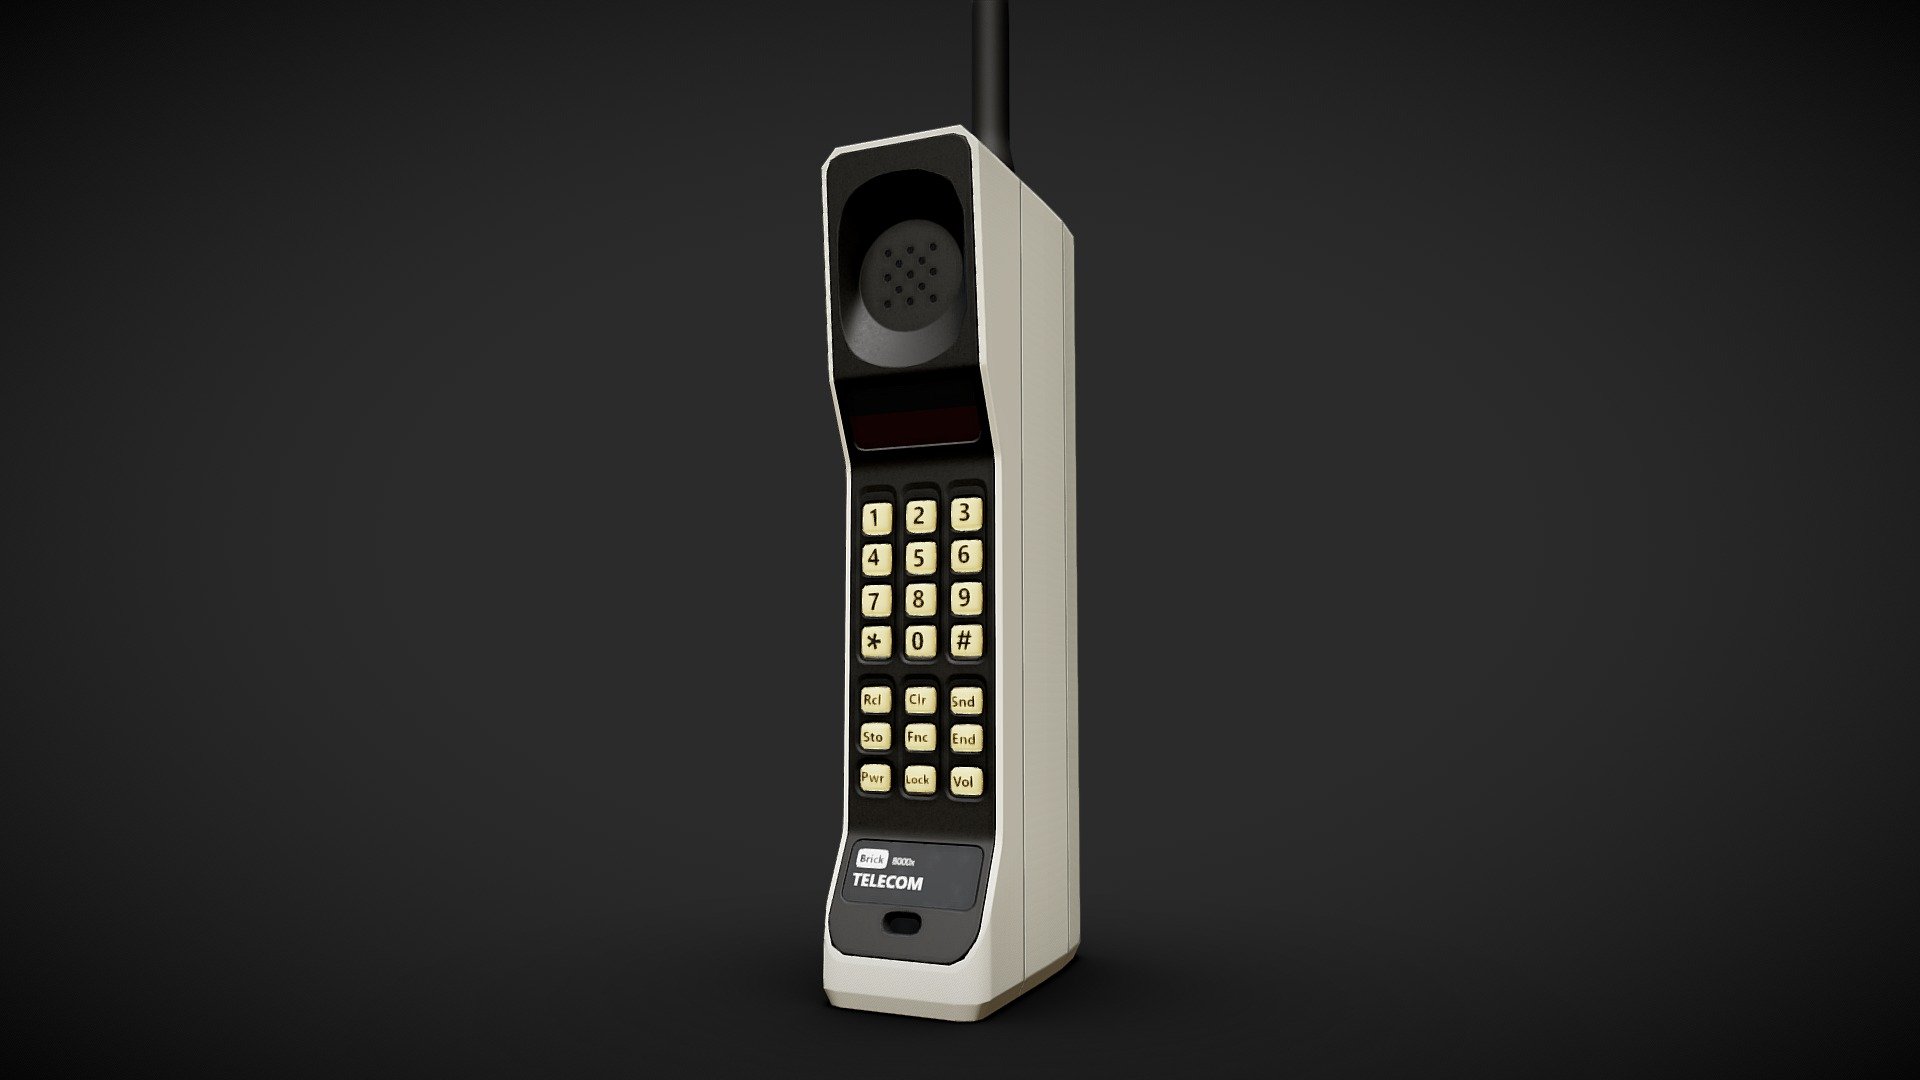 This model was inspired by the Motorola DynaTAC 8000X created by Martin Cooper, this model was launched in 1983.
It is my second submission for the Retro Electronics Challenge ;)

Made with Blender and GIMP 3d model